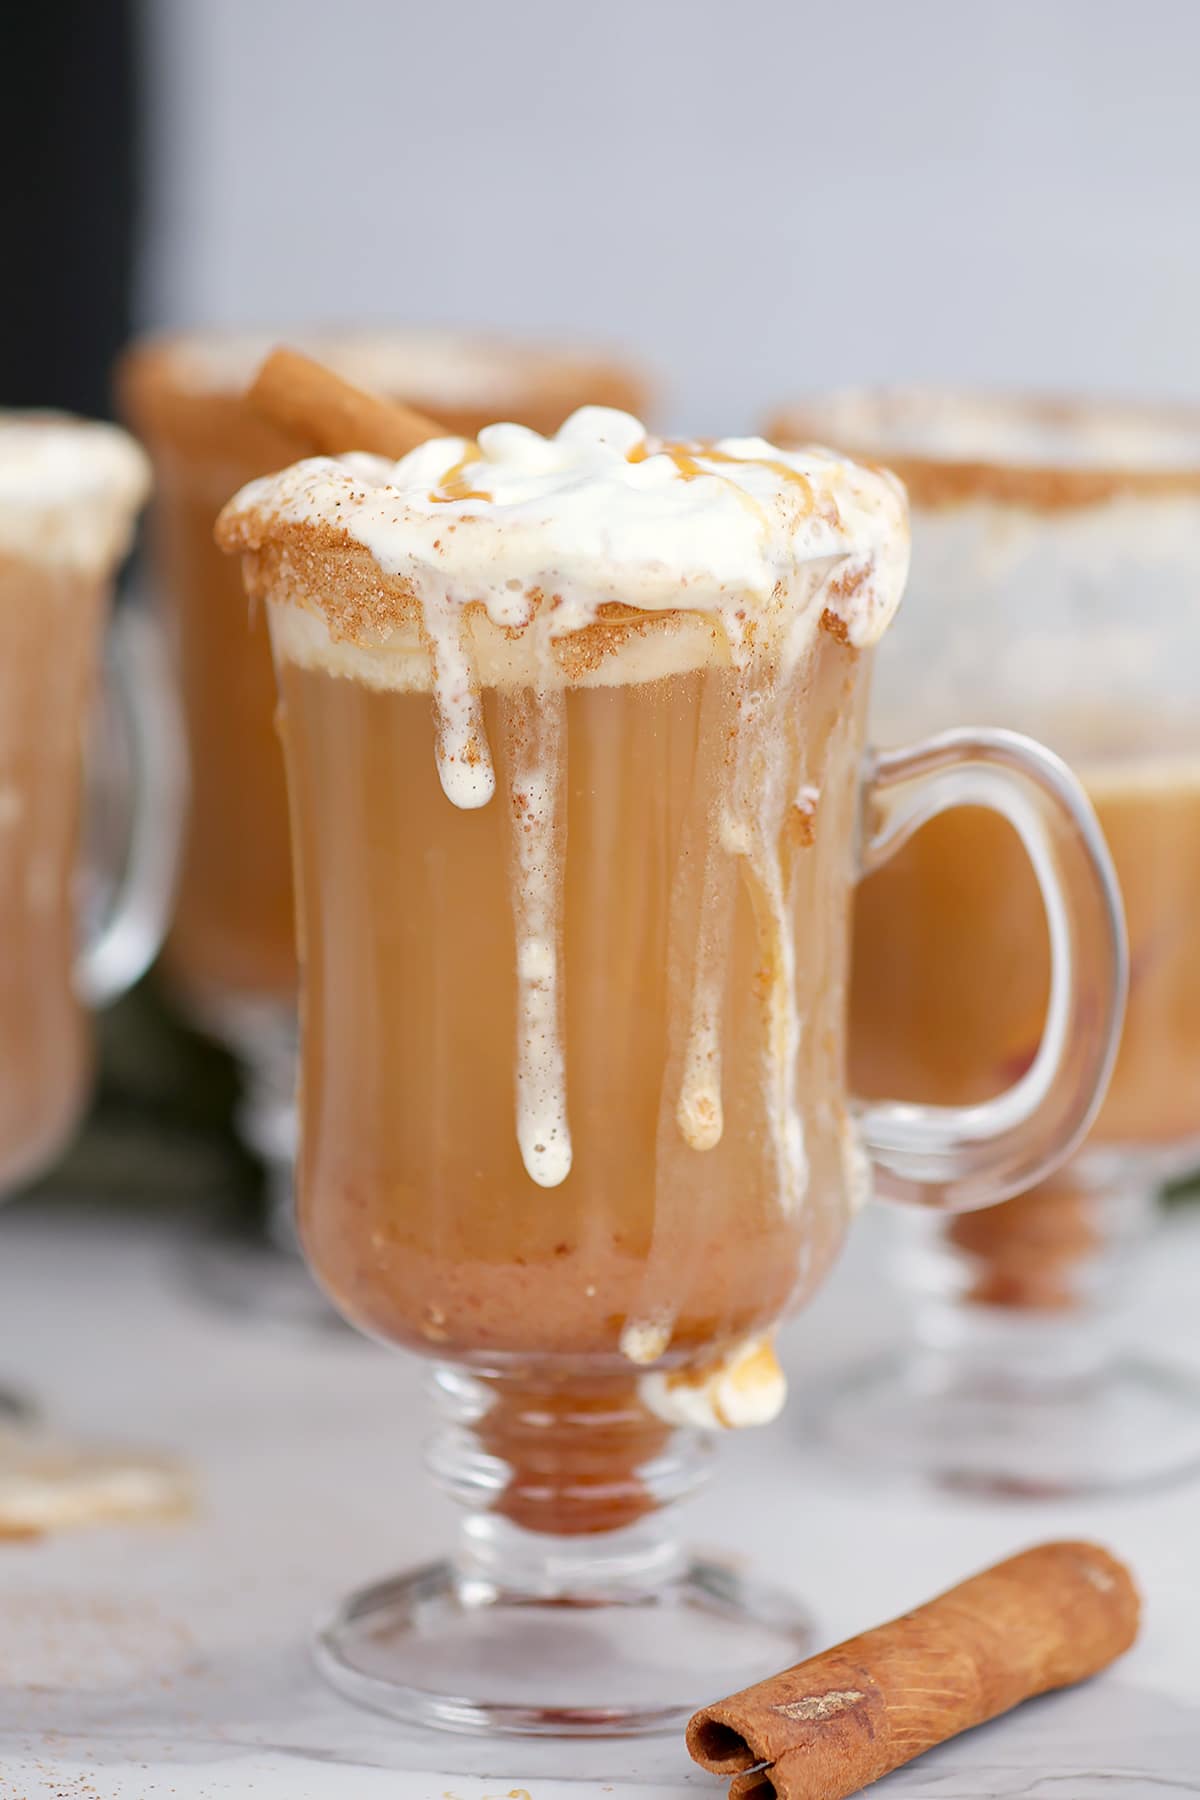 A mug of cider with whipped cream dripping down the sides.